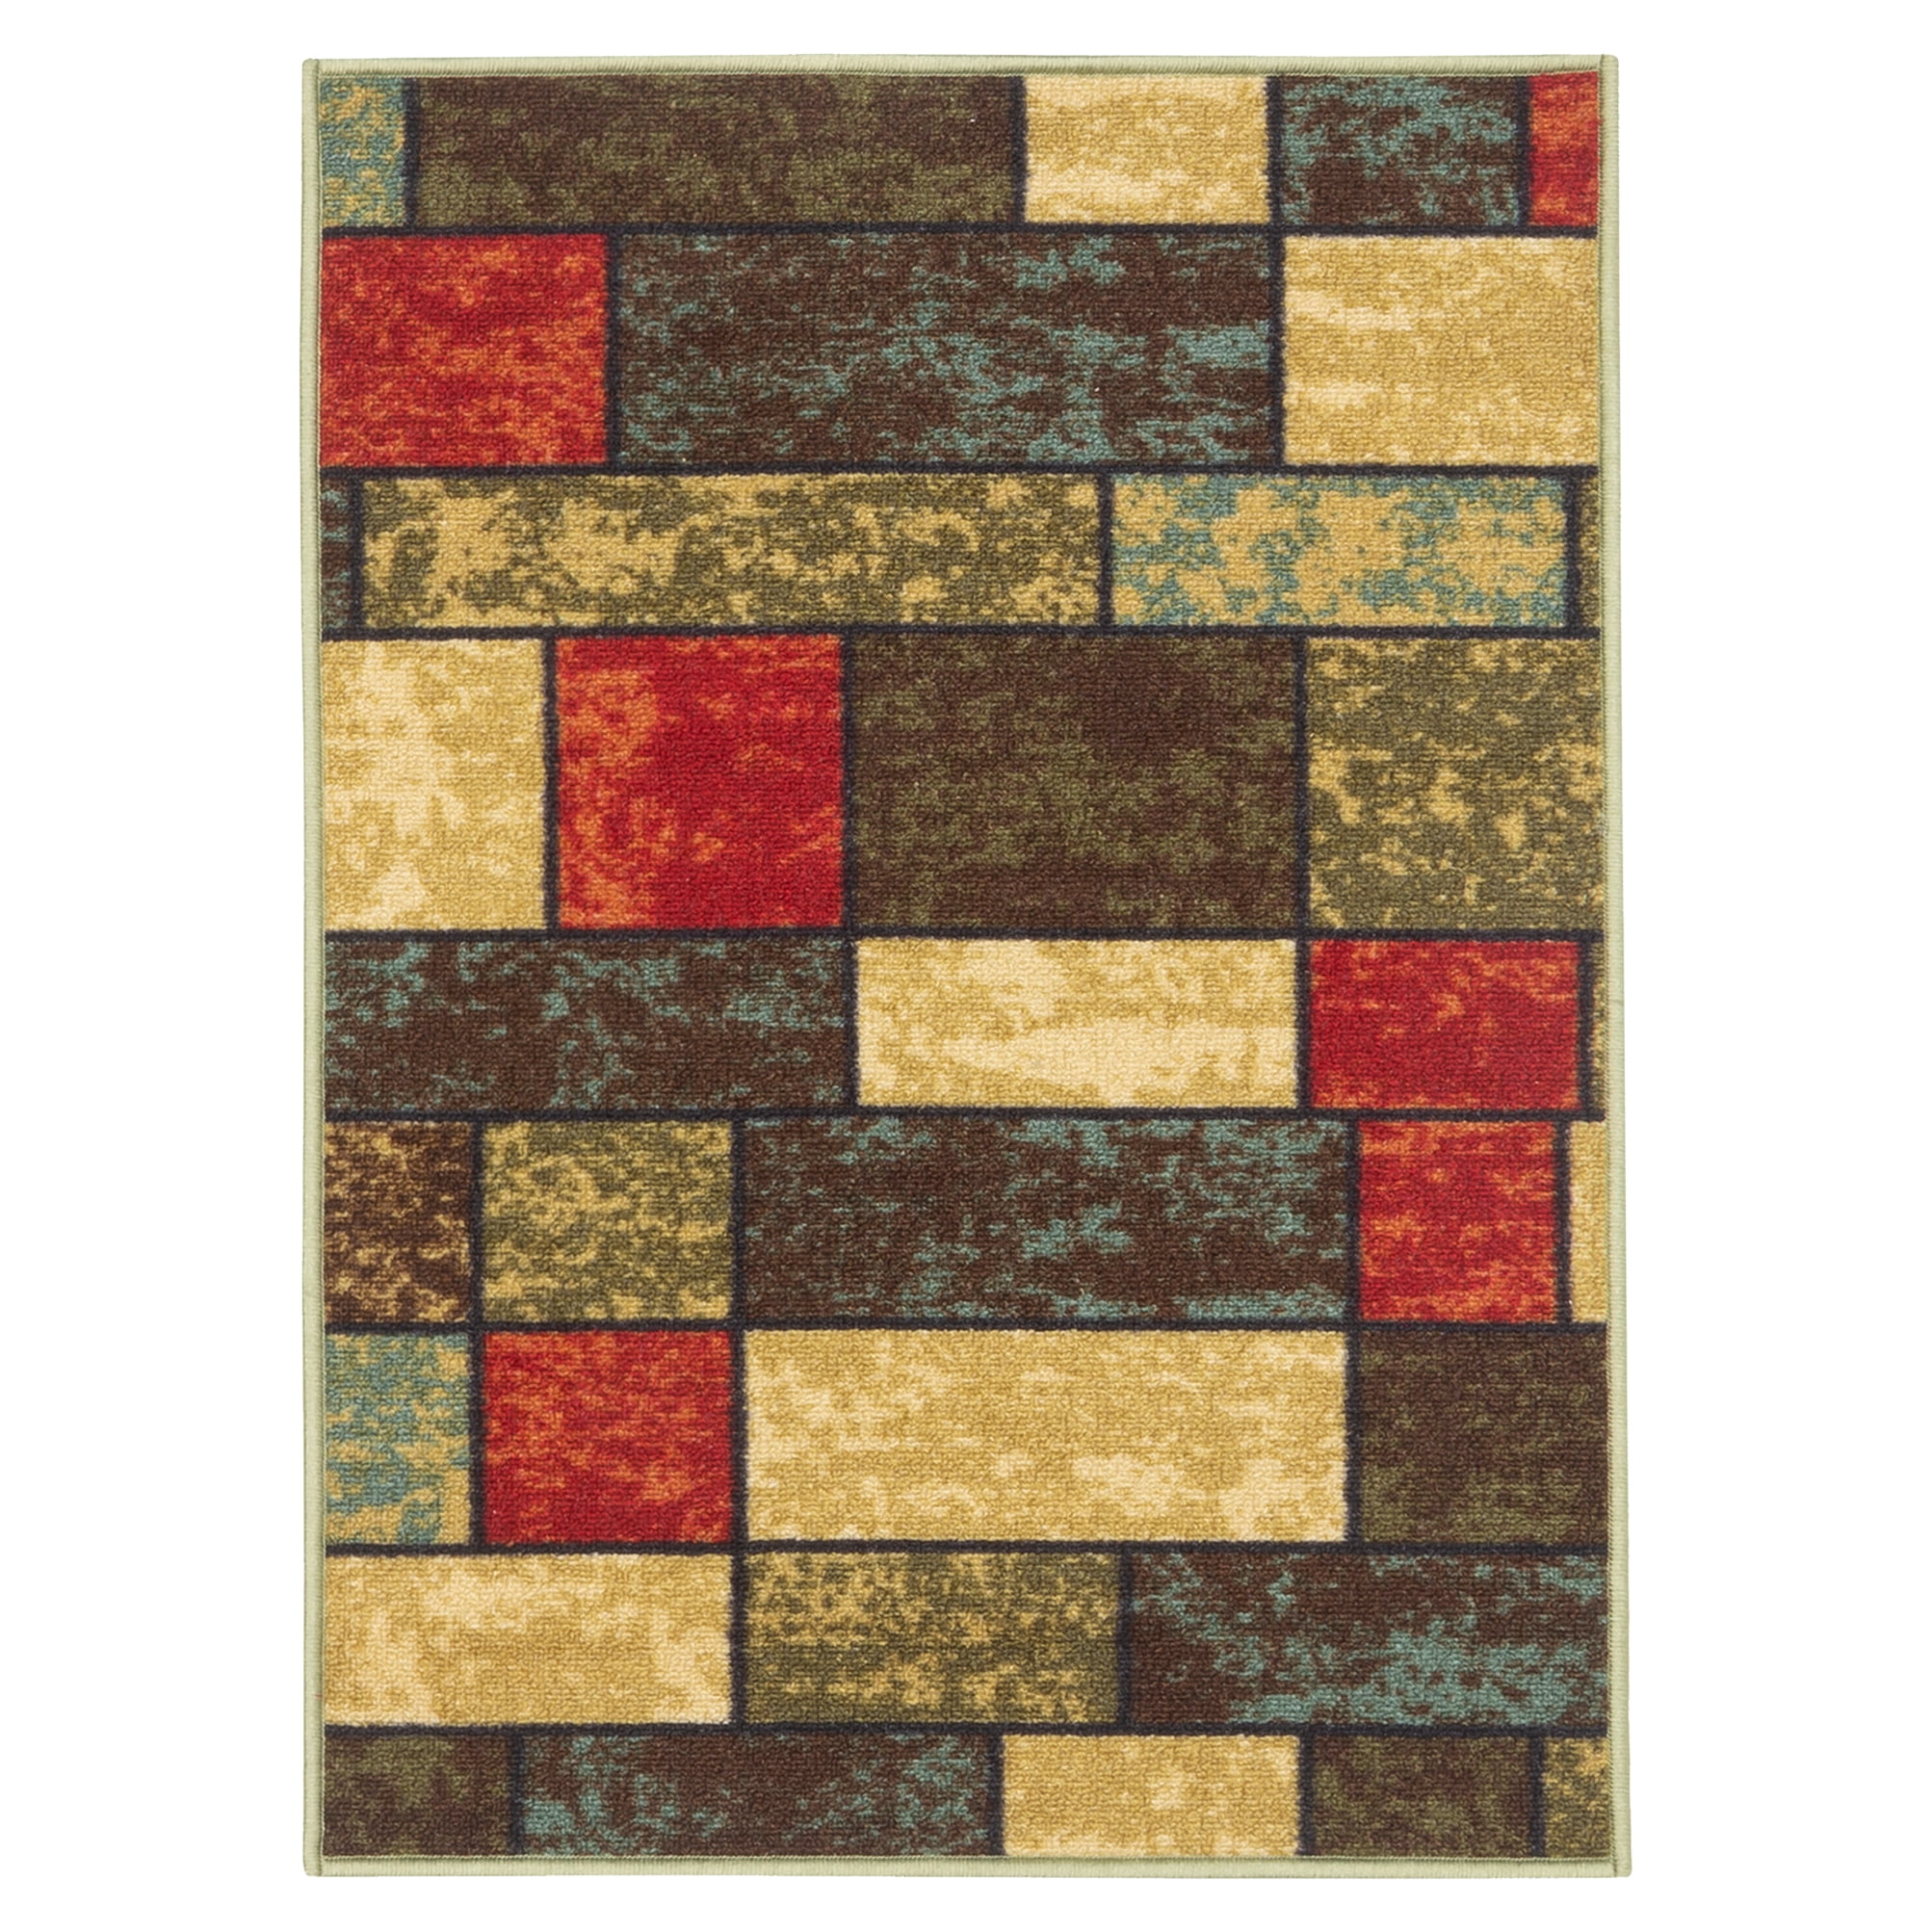 Details about   Custom Size Runner Rug Abstract Patchwork Brown Non Skid Cut to Size Rug Runners 